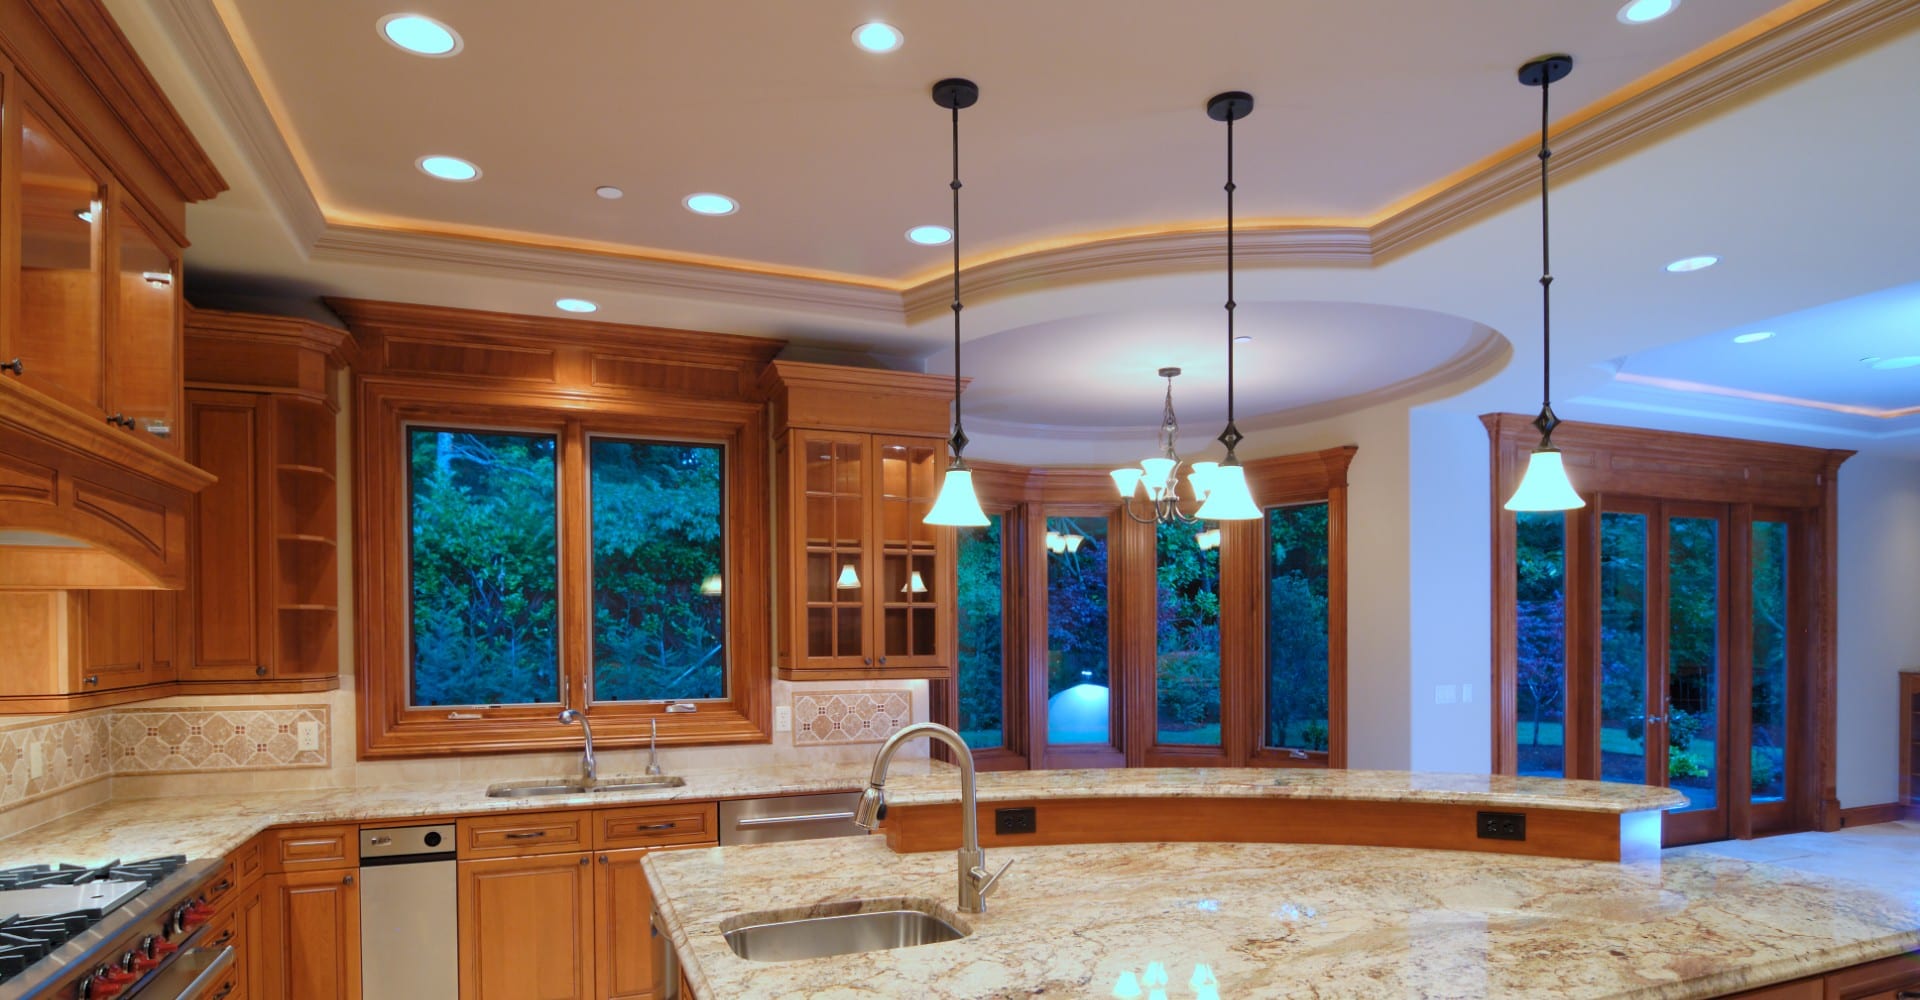 Let There be Light: 5 Amazing Lighting Options for a Kitchen Remodel